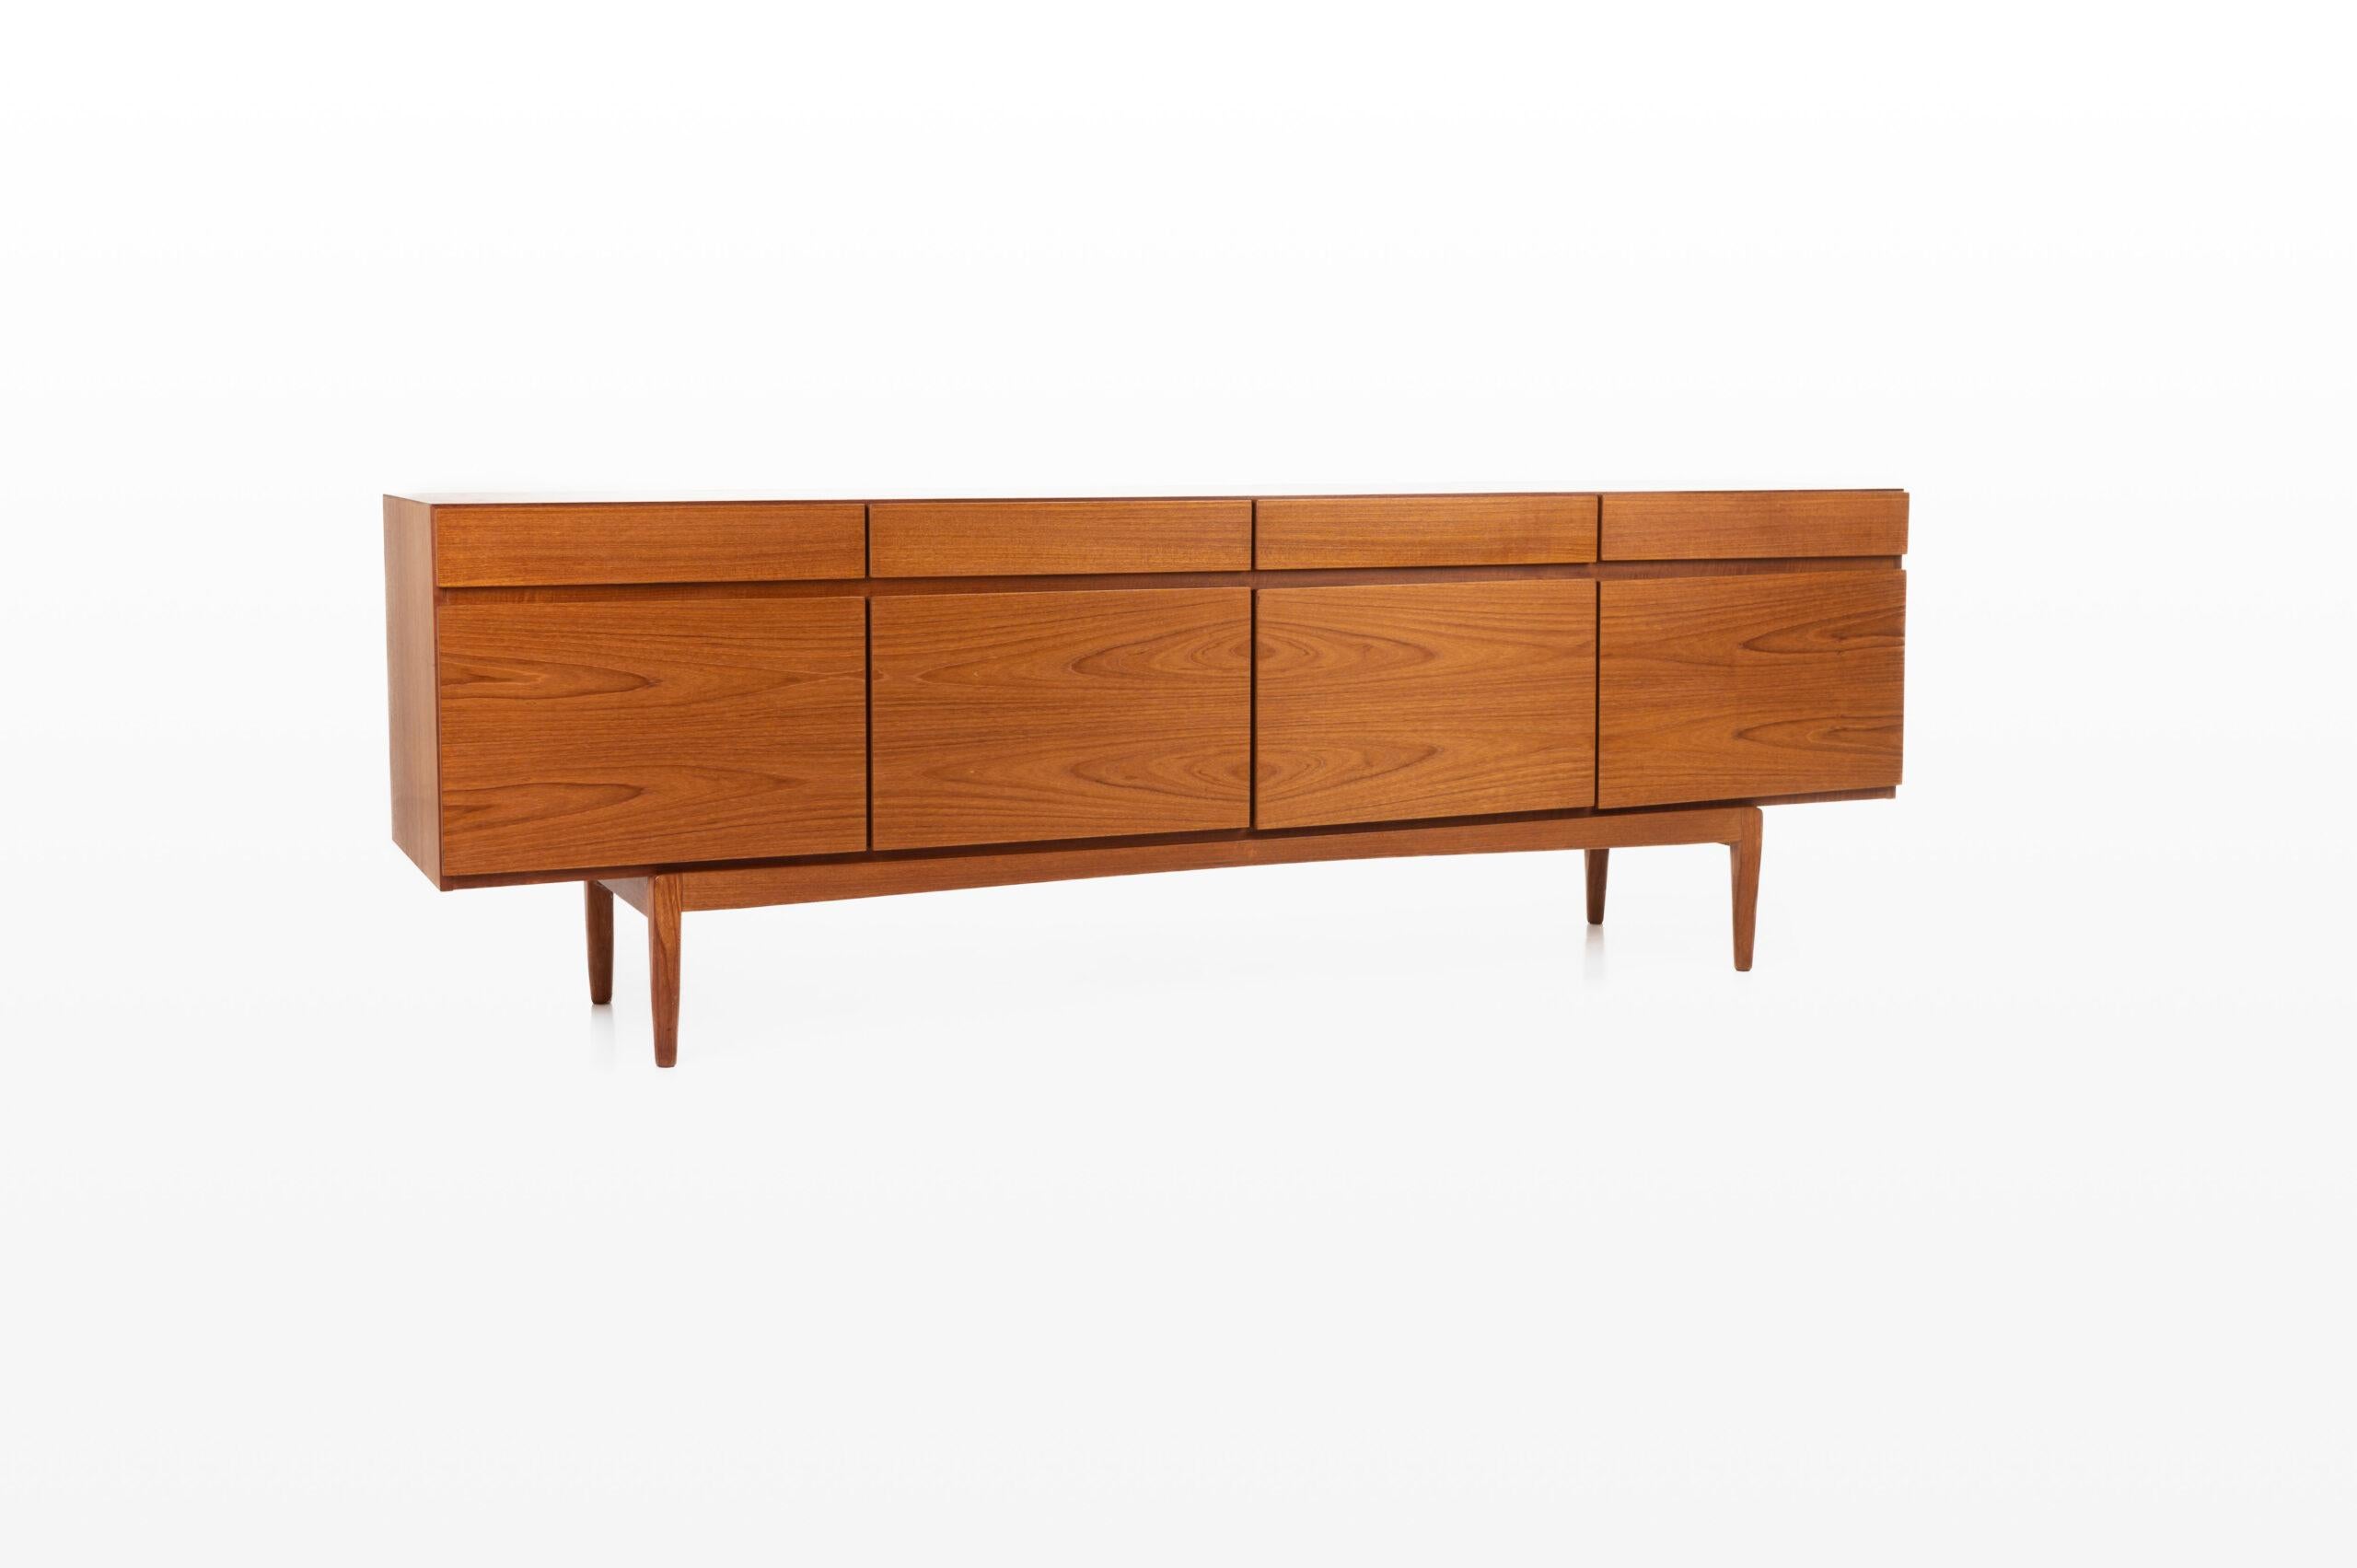 Teak ‘FA-66’ sideboard designed by Ib Kofod Larsen and produced by Faarup Møbelfabrik in Denmark in the 1960s. The sideboard has four doors, 4 drawers and plenty of storage space. The sticker of the producer is still present. This sideboard is a